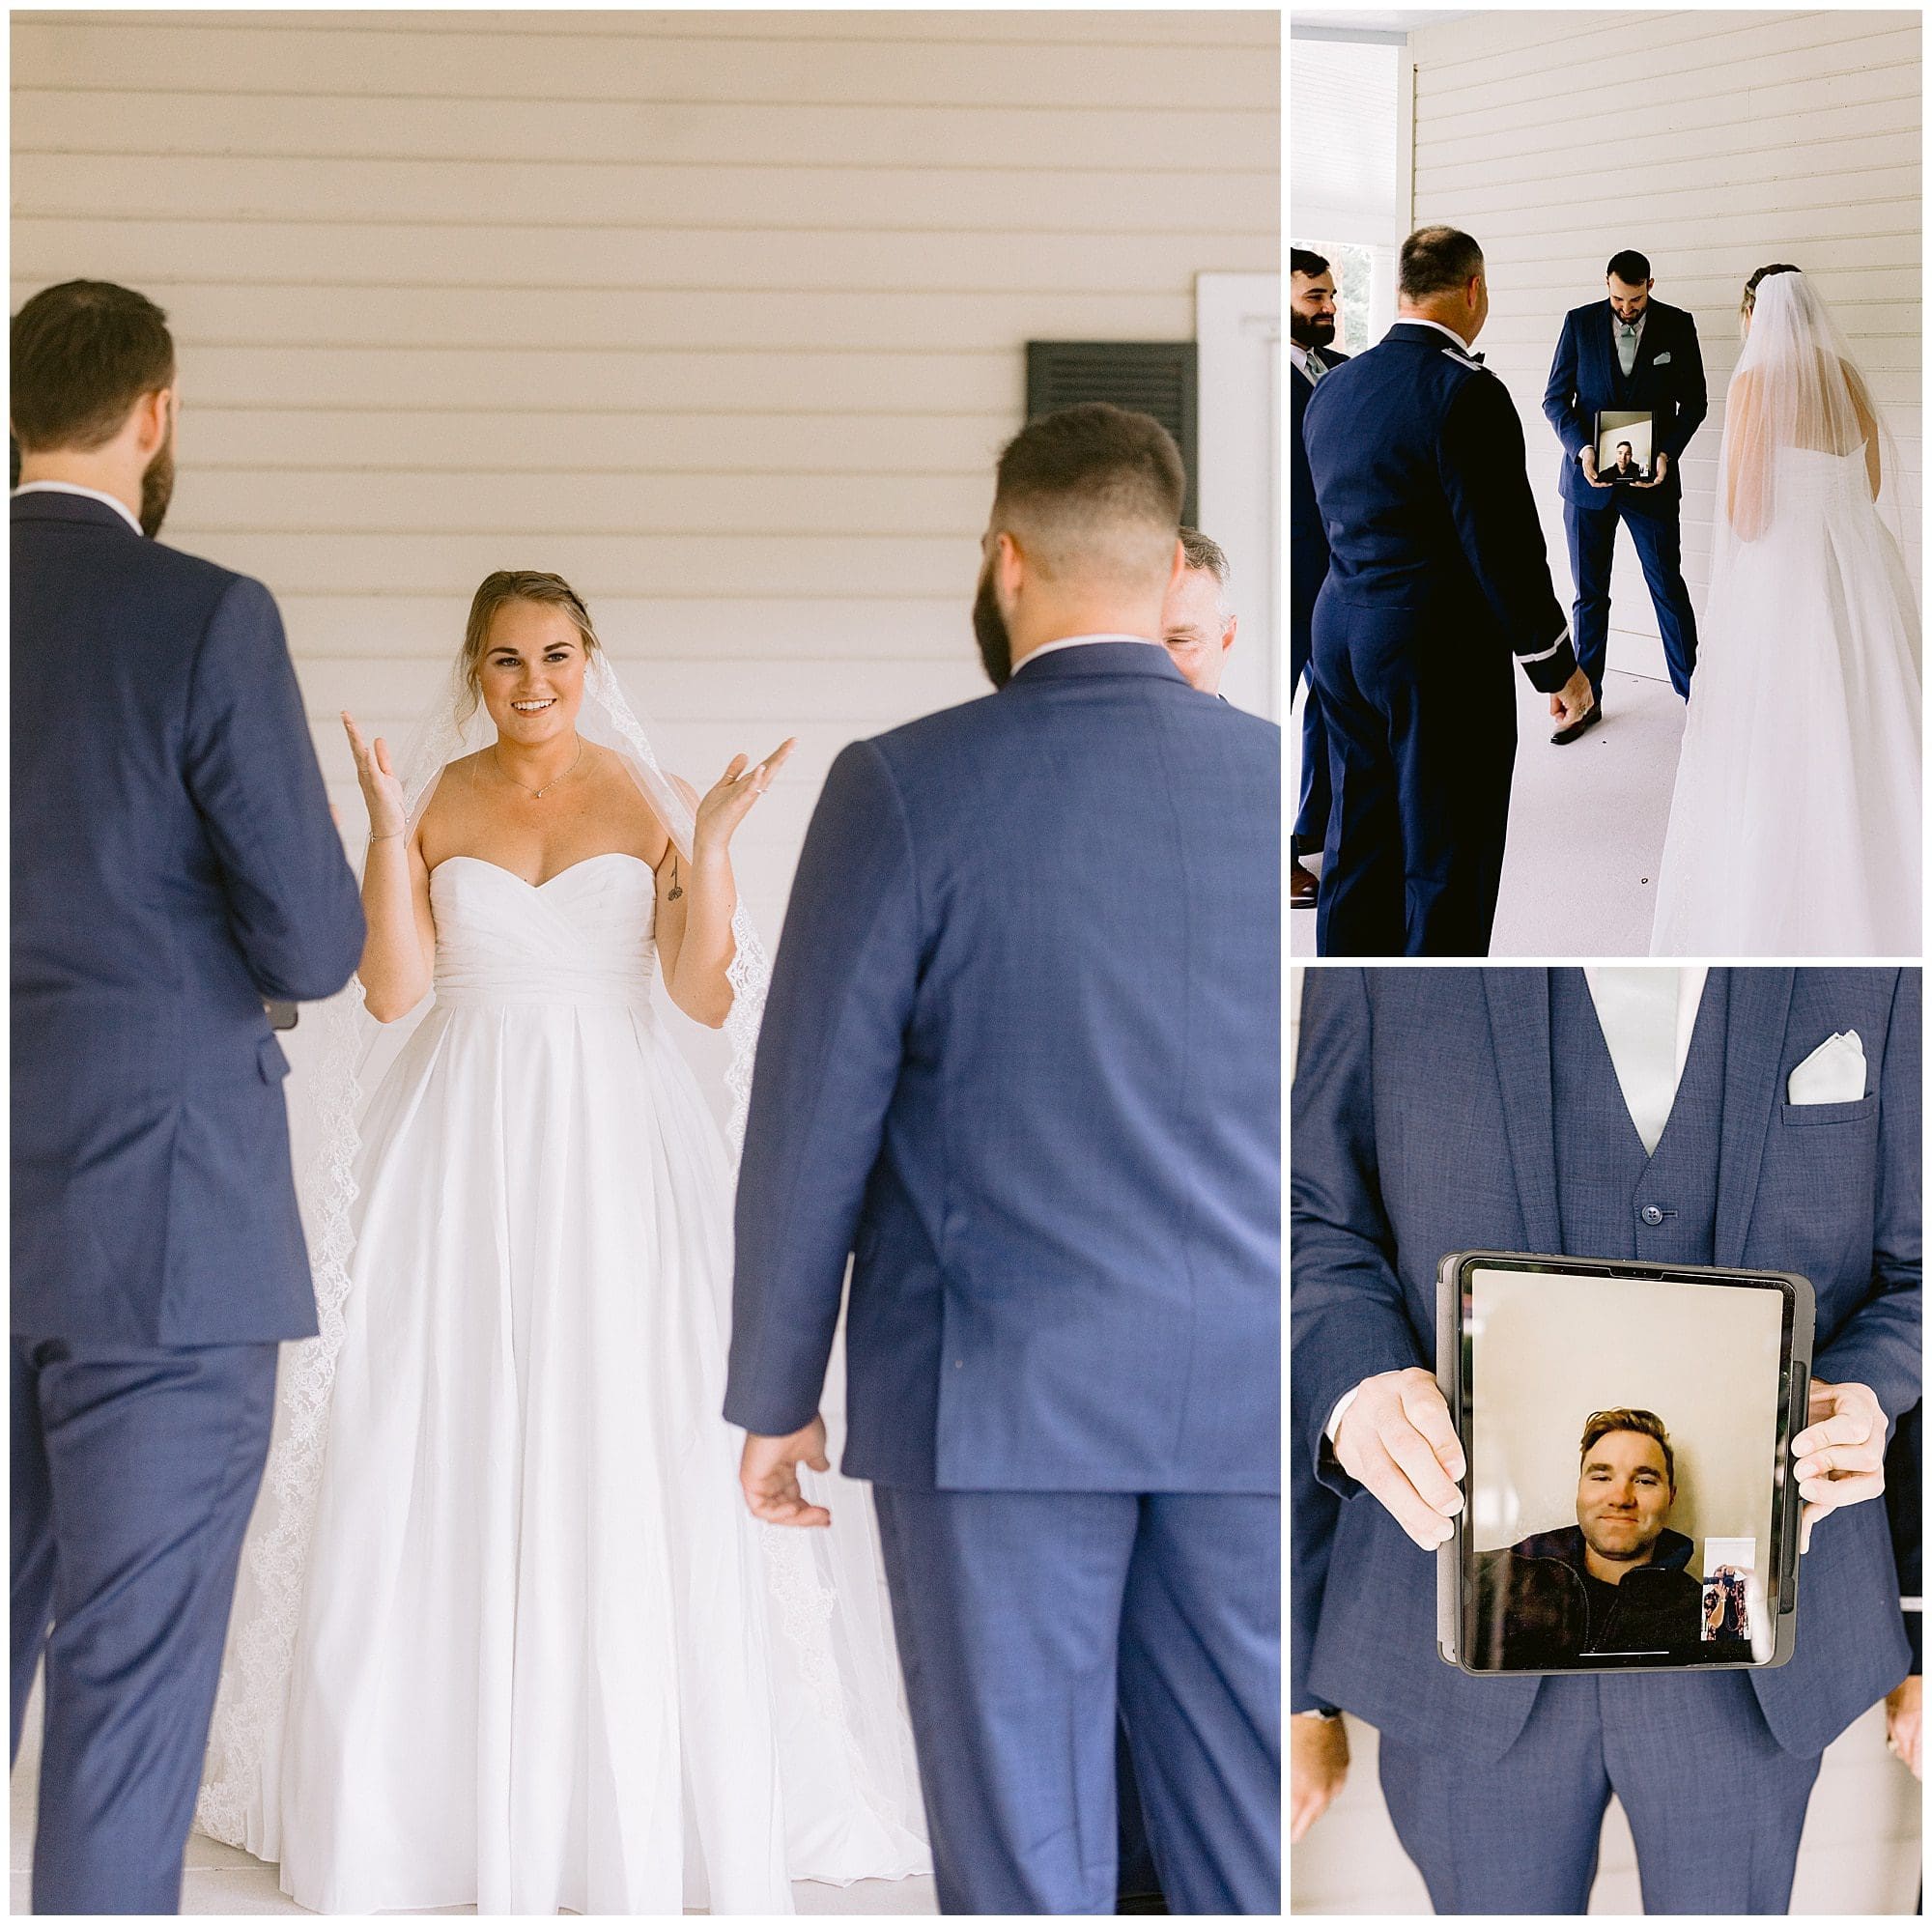 Bride shares a first look with her dad and brother - one who was there via facetime.